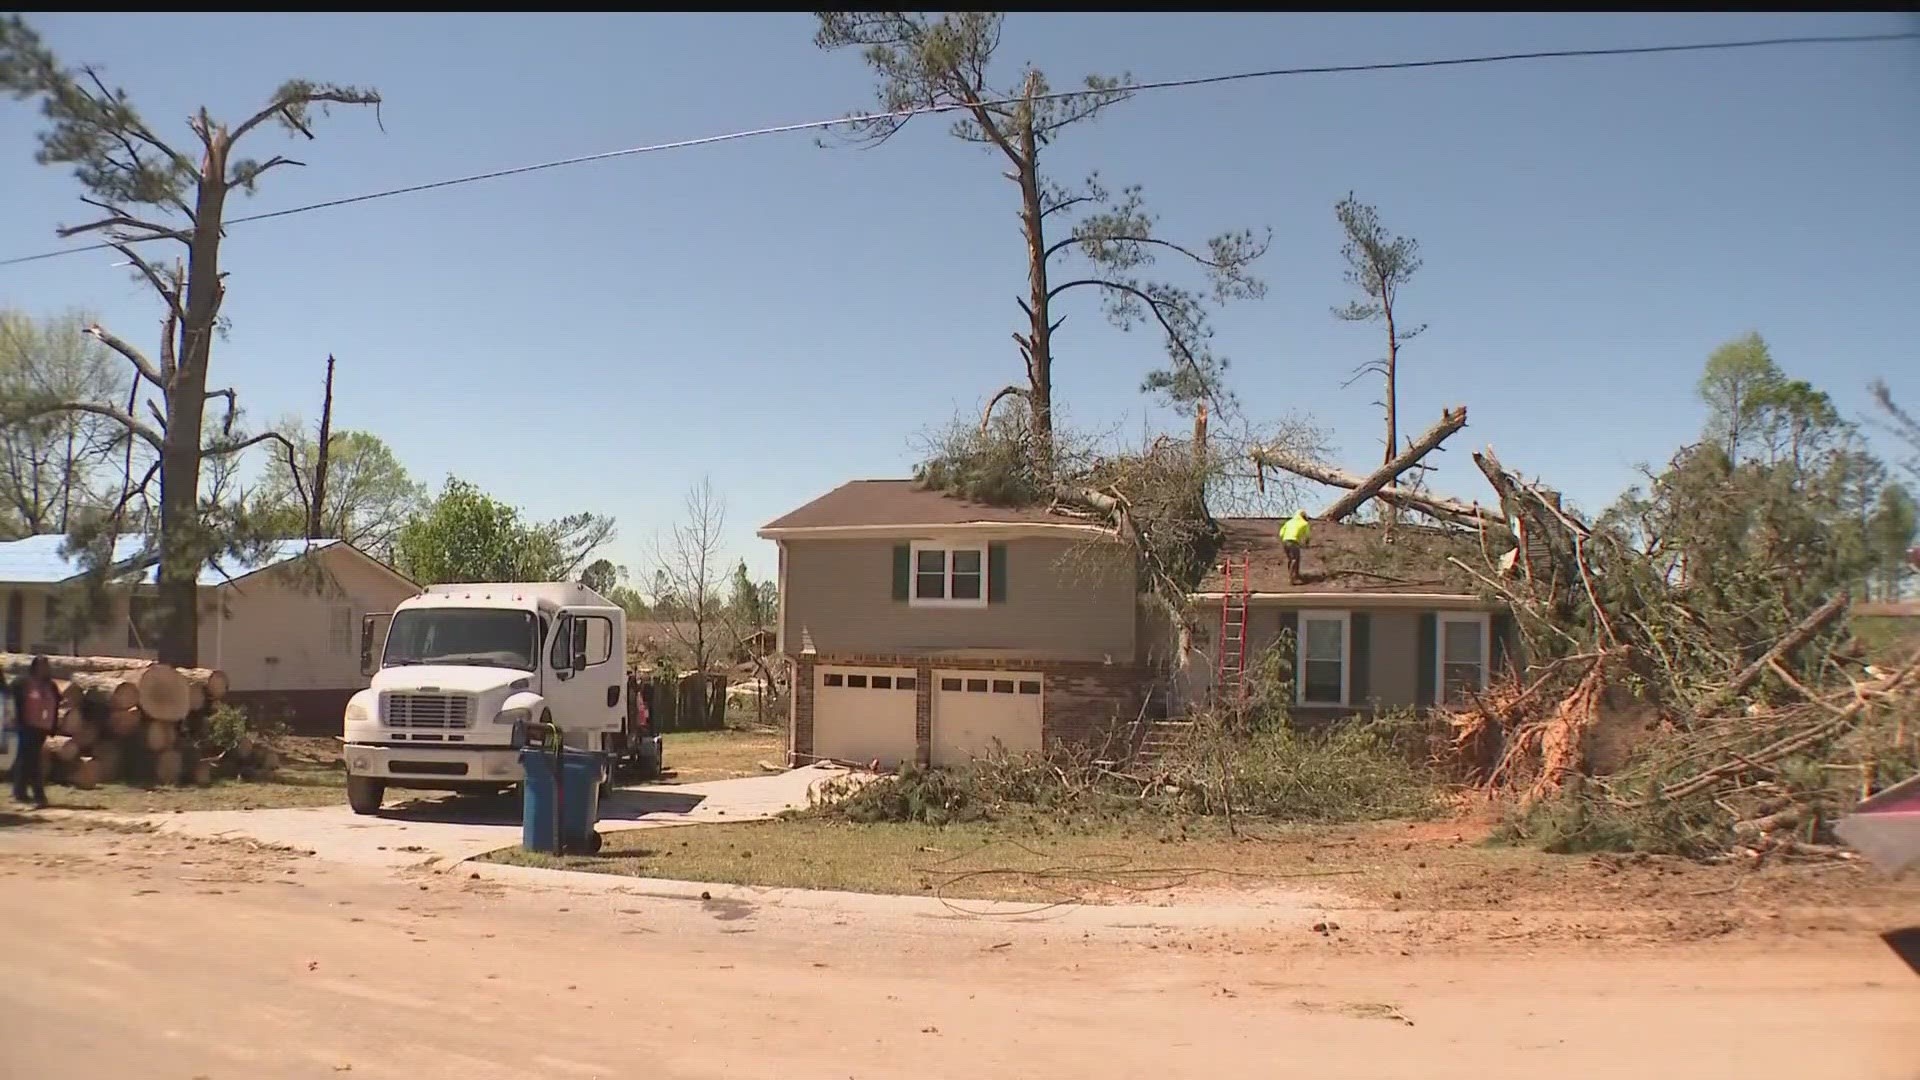 Rockdale County EMA said its focus on Friday was ‘debris management’ following an EF-2 tornado that hit the area earlier in the week.